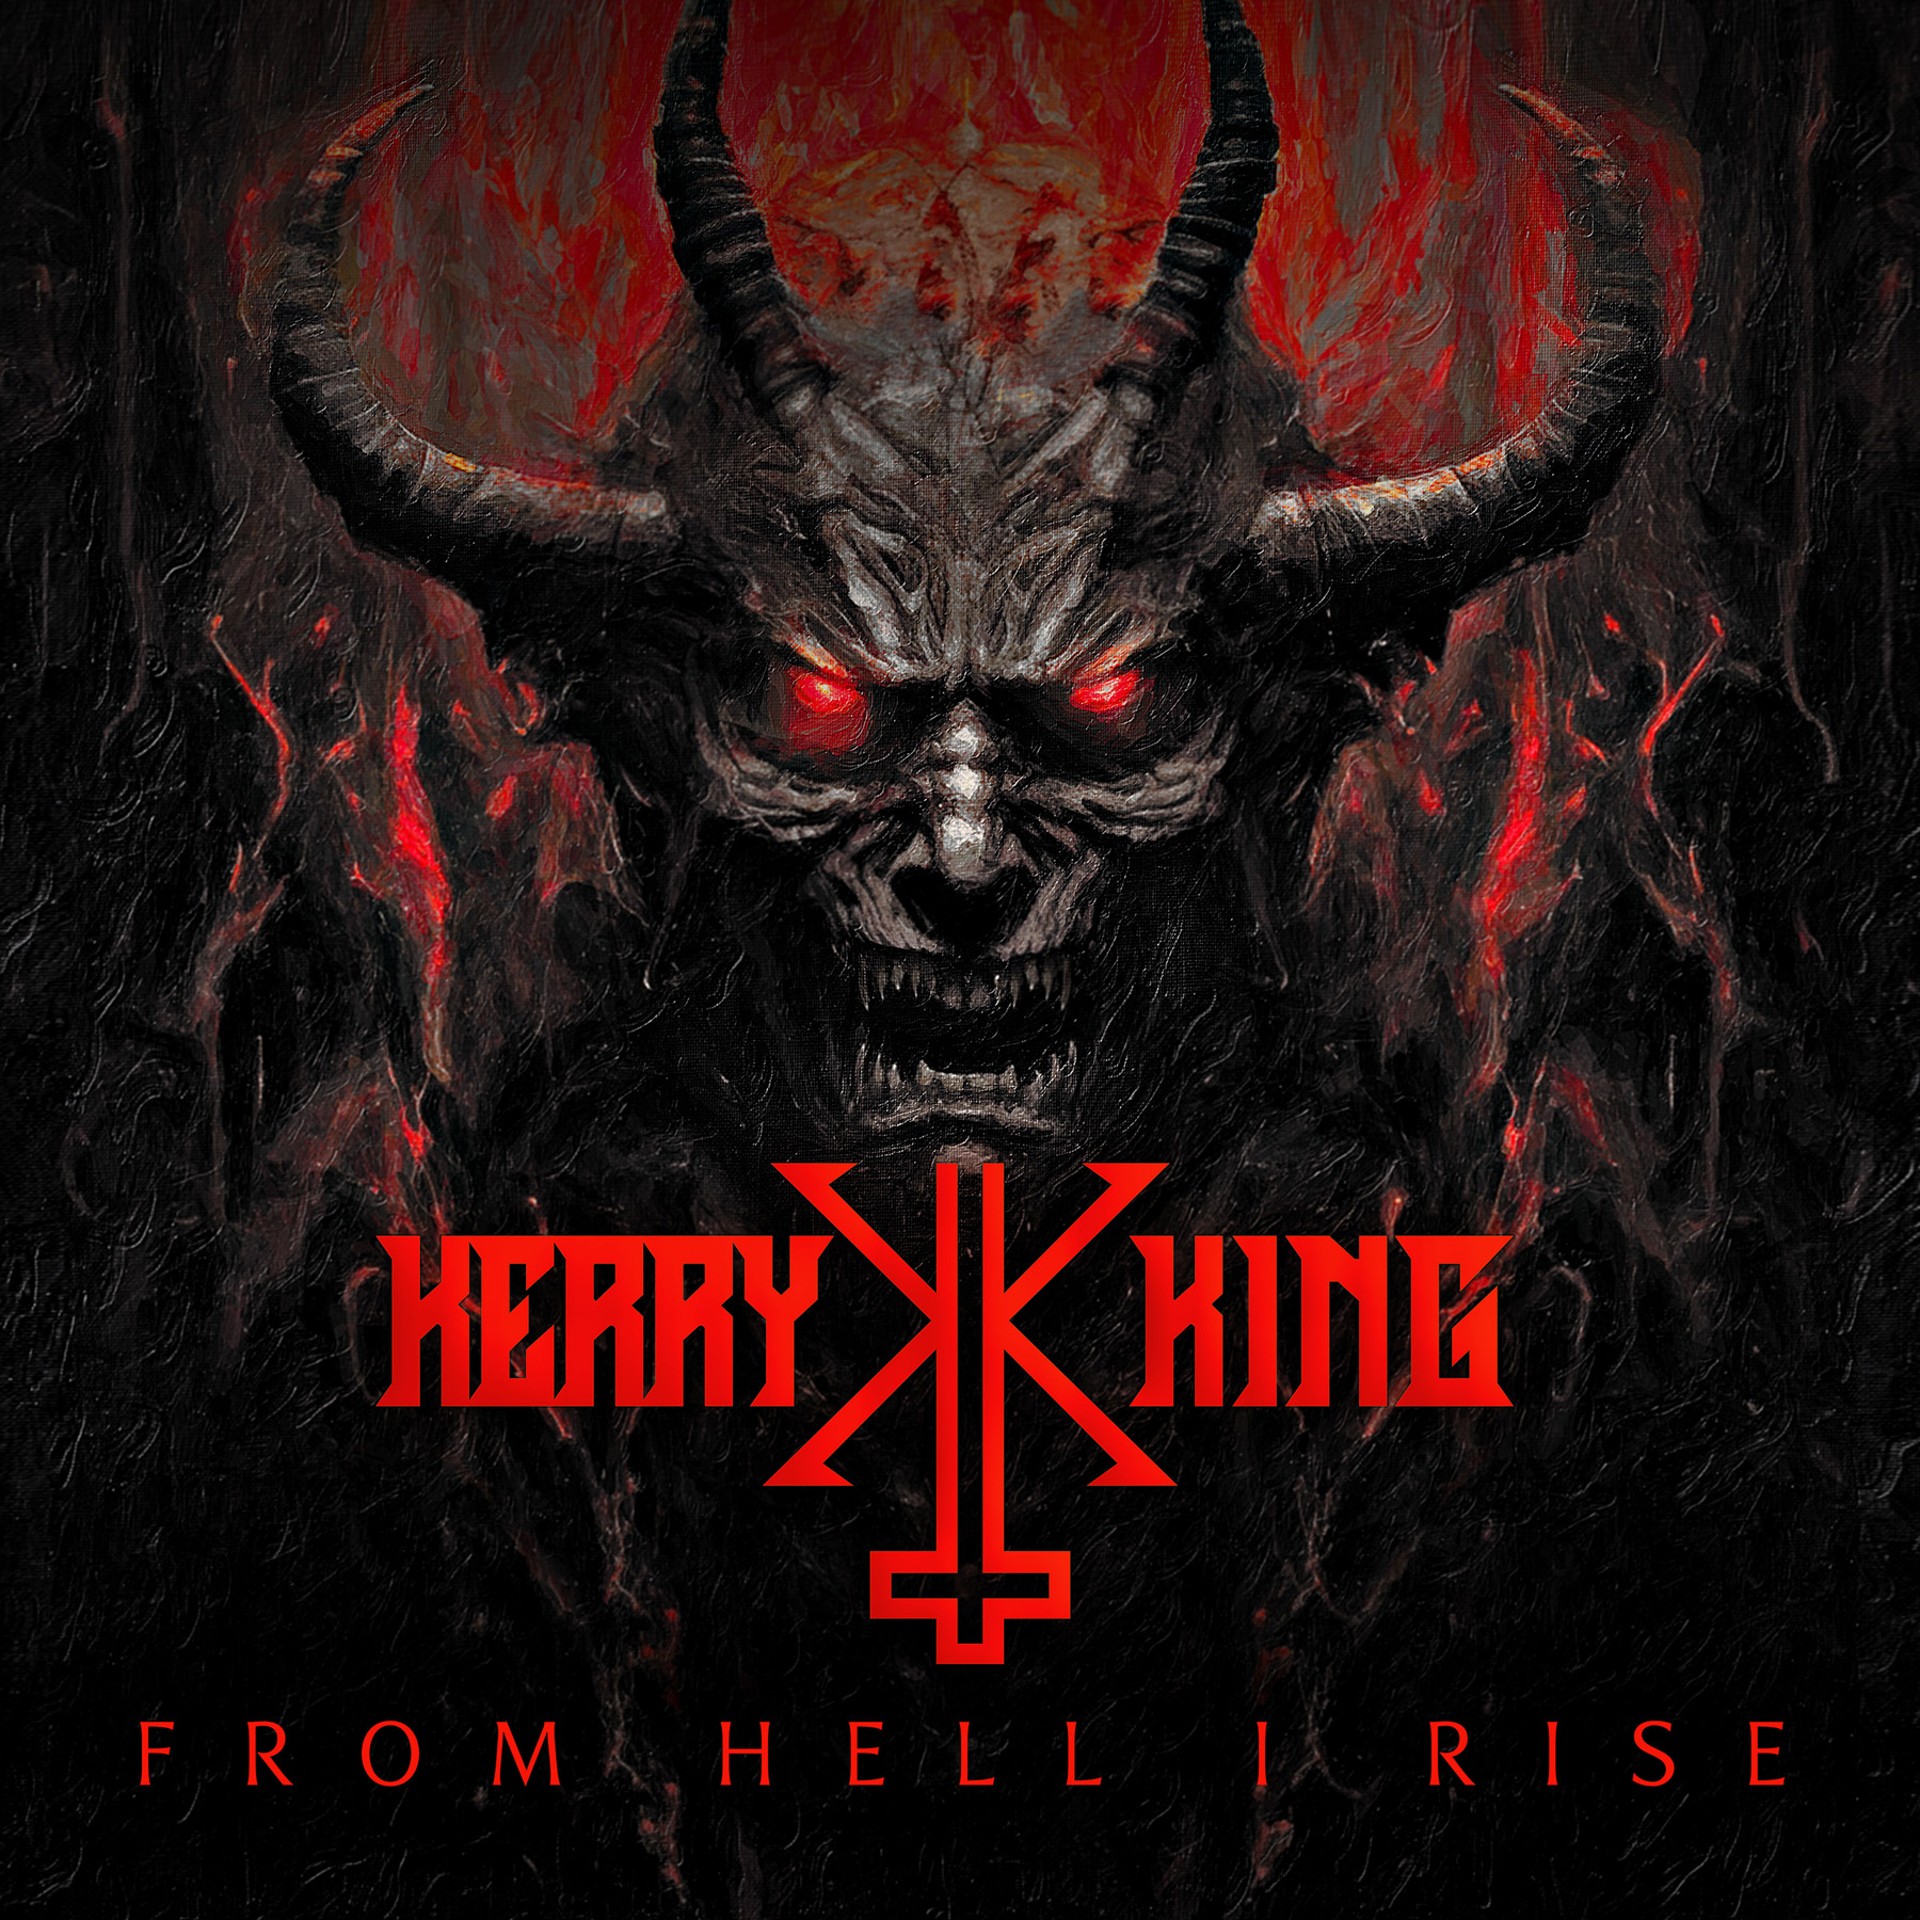 Kerry King ‘From Hell I Rise’ album artwork